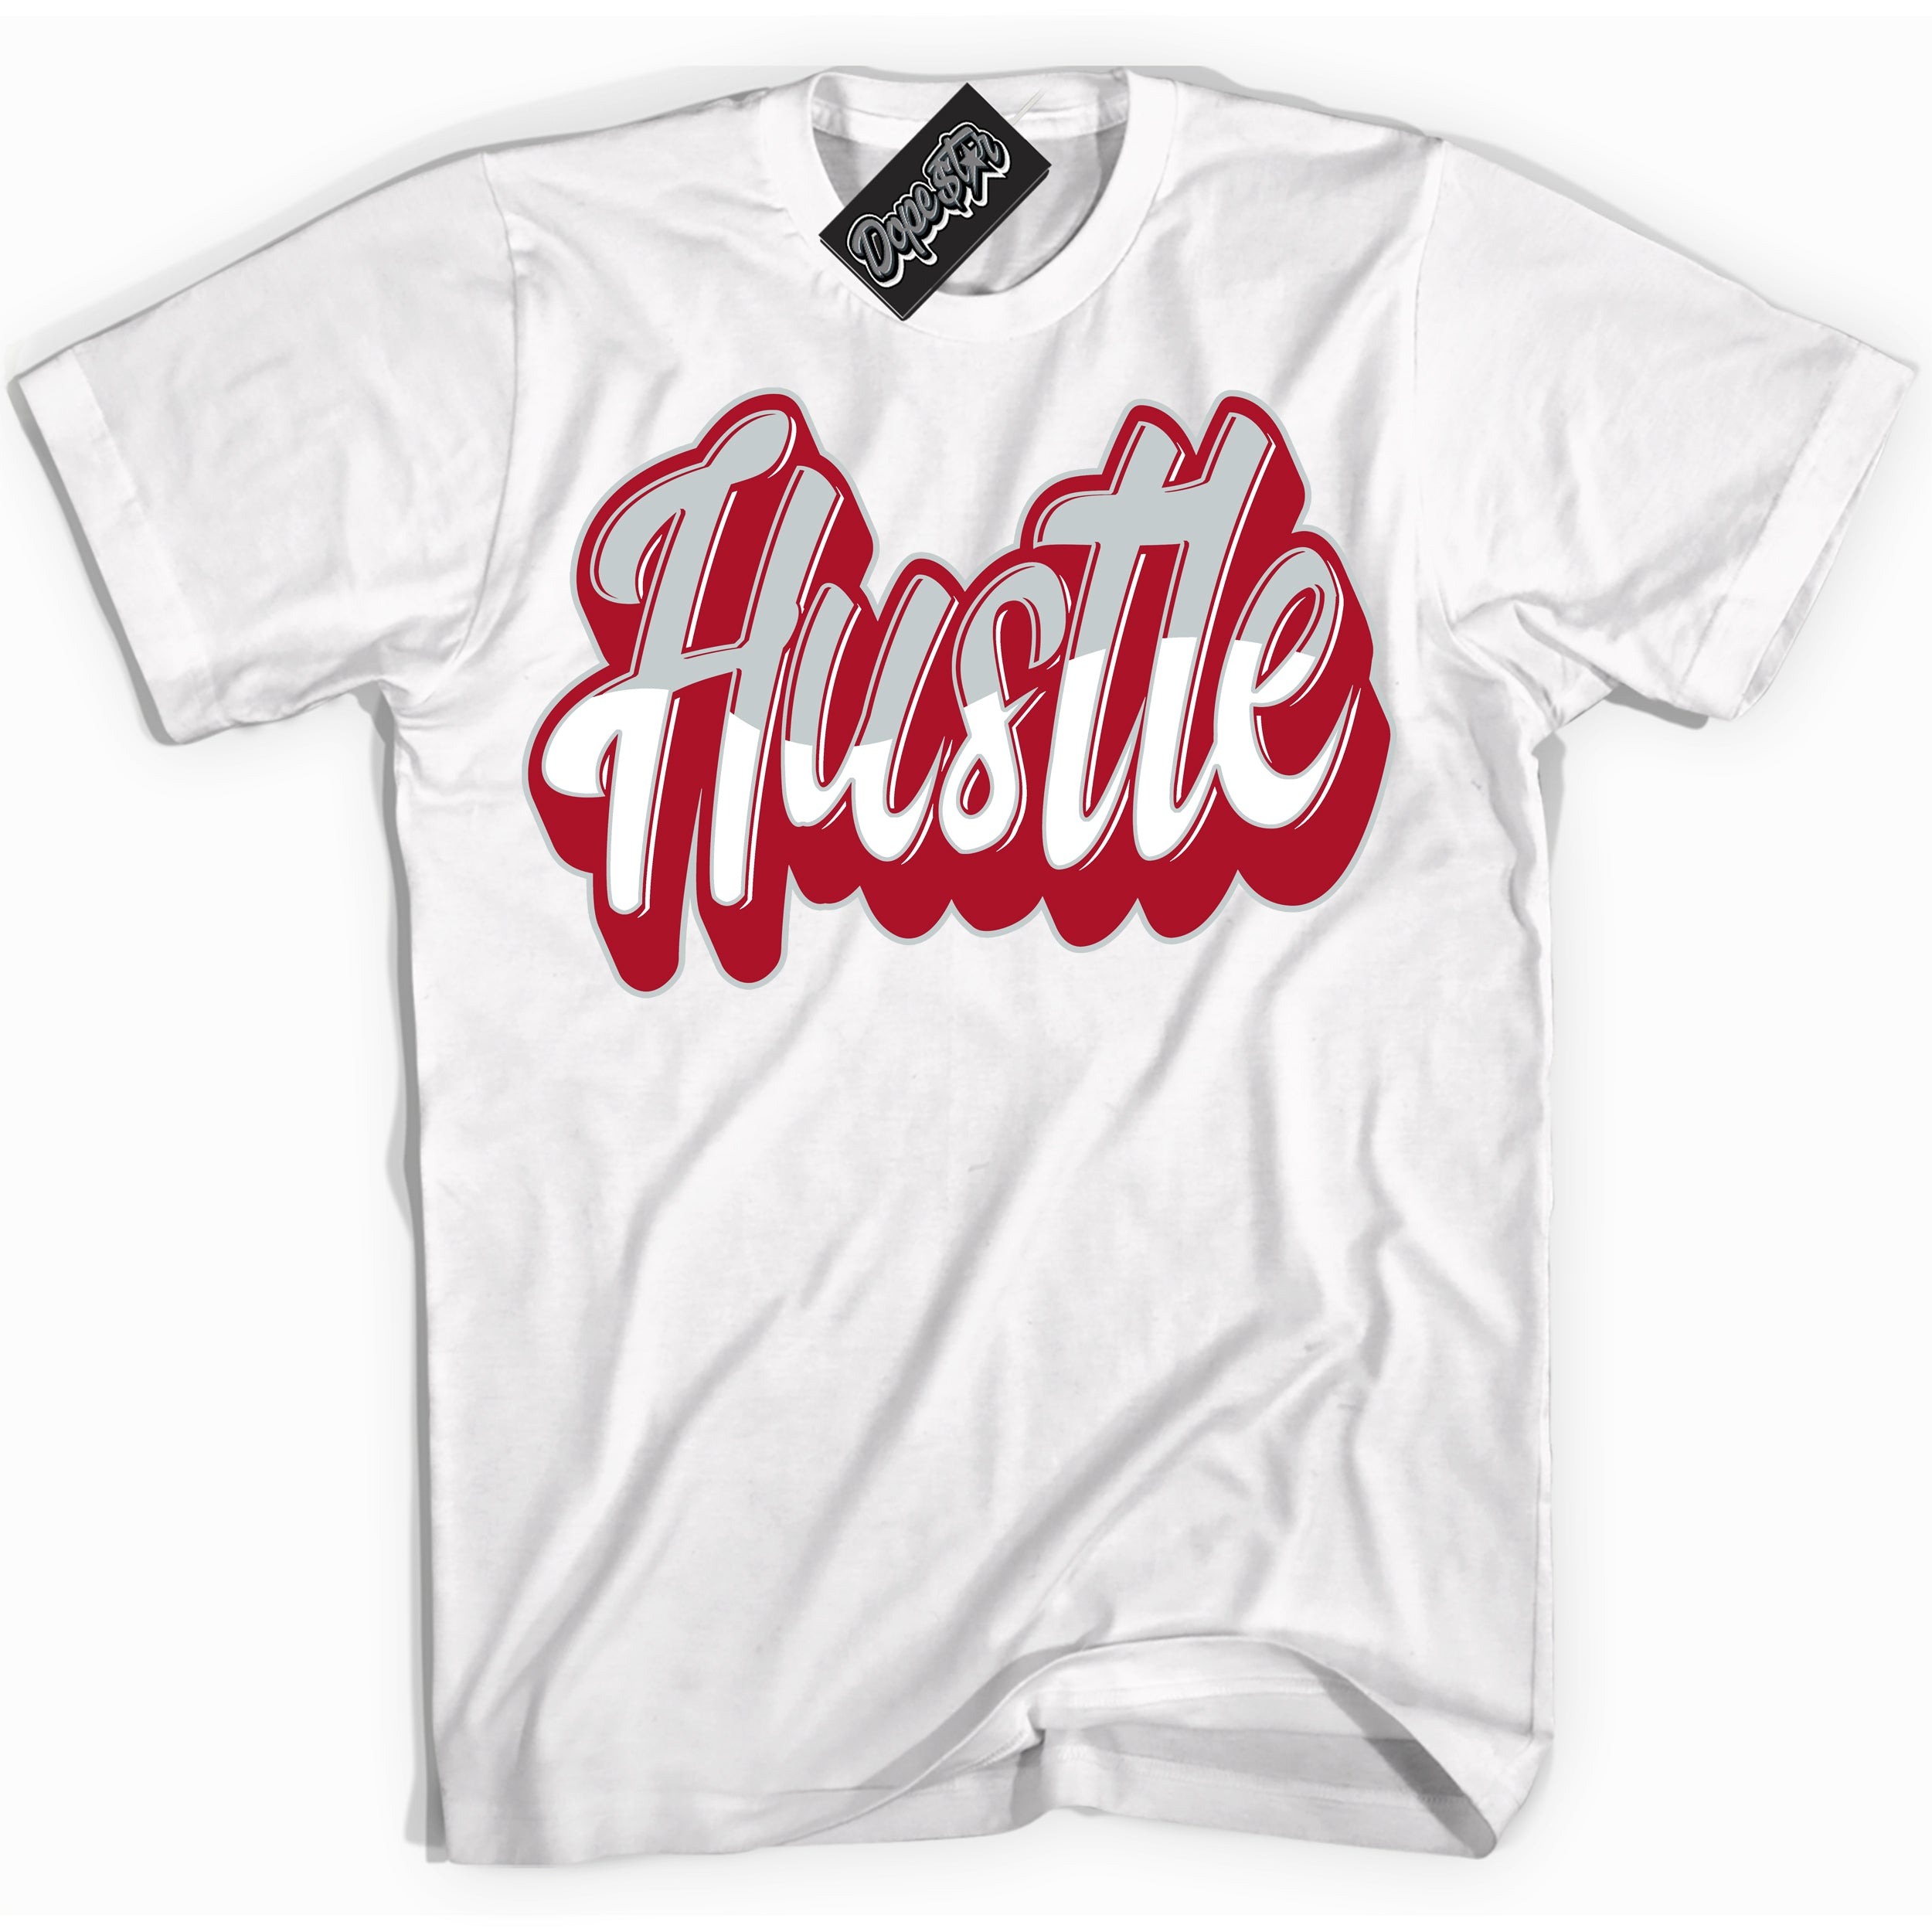 Cool White Shirt with “ Hustle” design that perfectly matches Reverse Ultraman Sneakers.